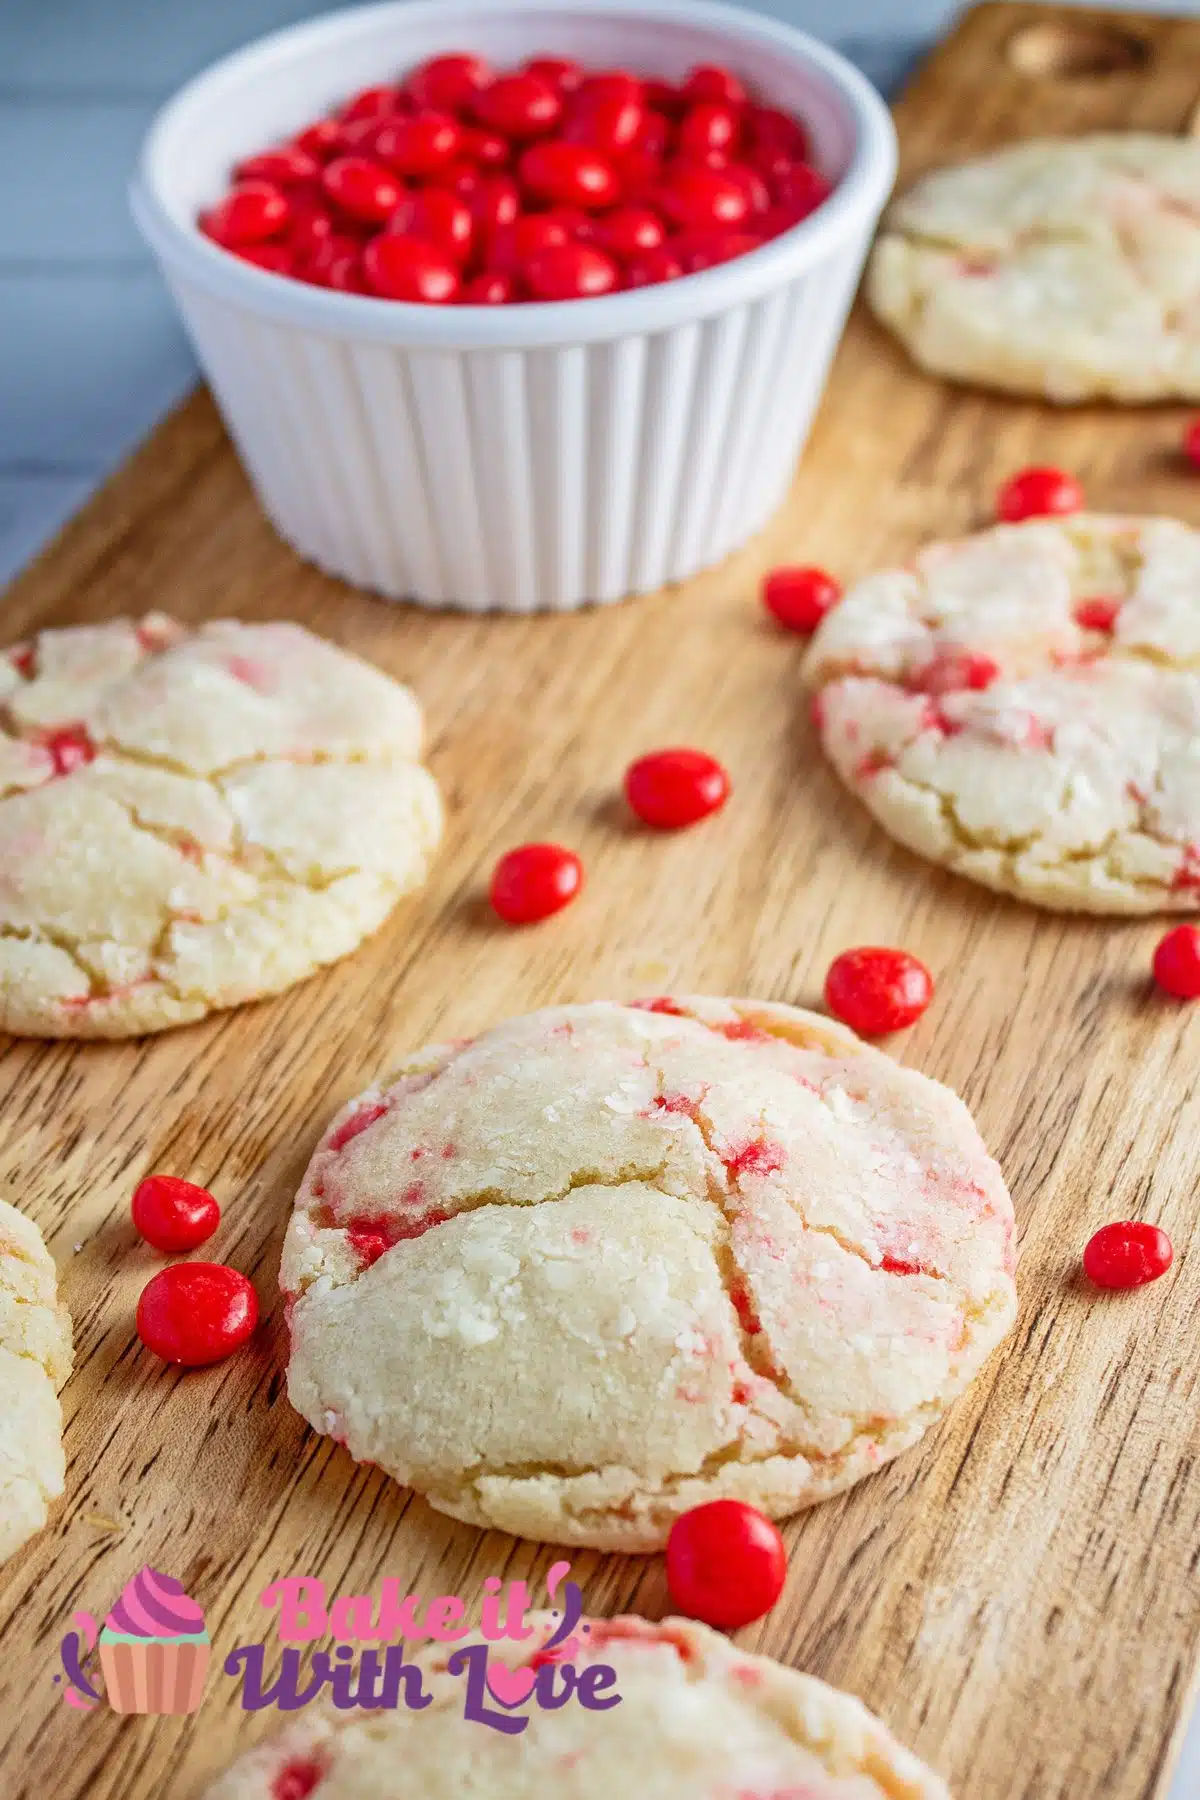 Tender red hot cookies on wooden serving tray with a bowl of more candies to snack on.